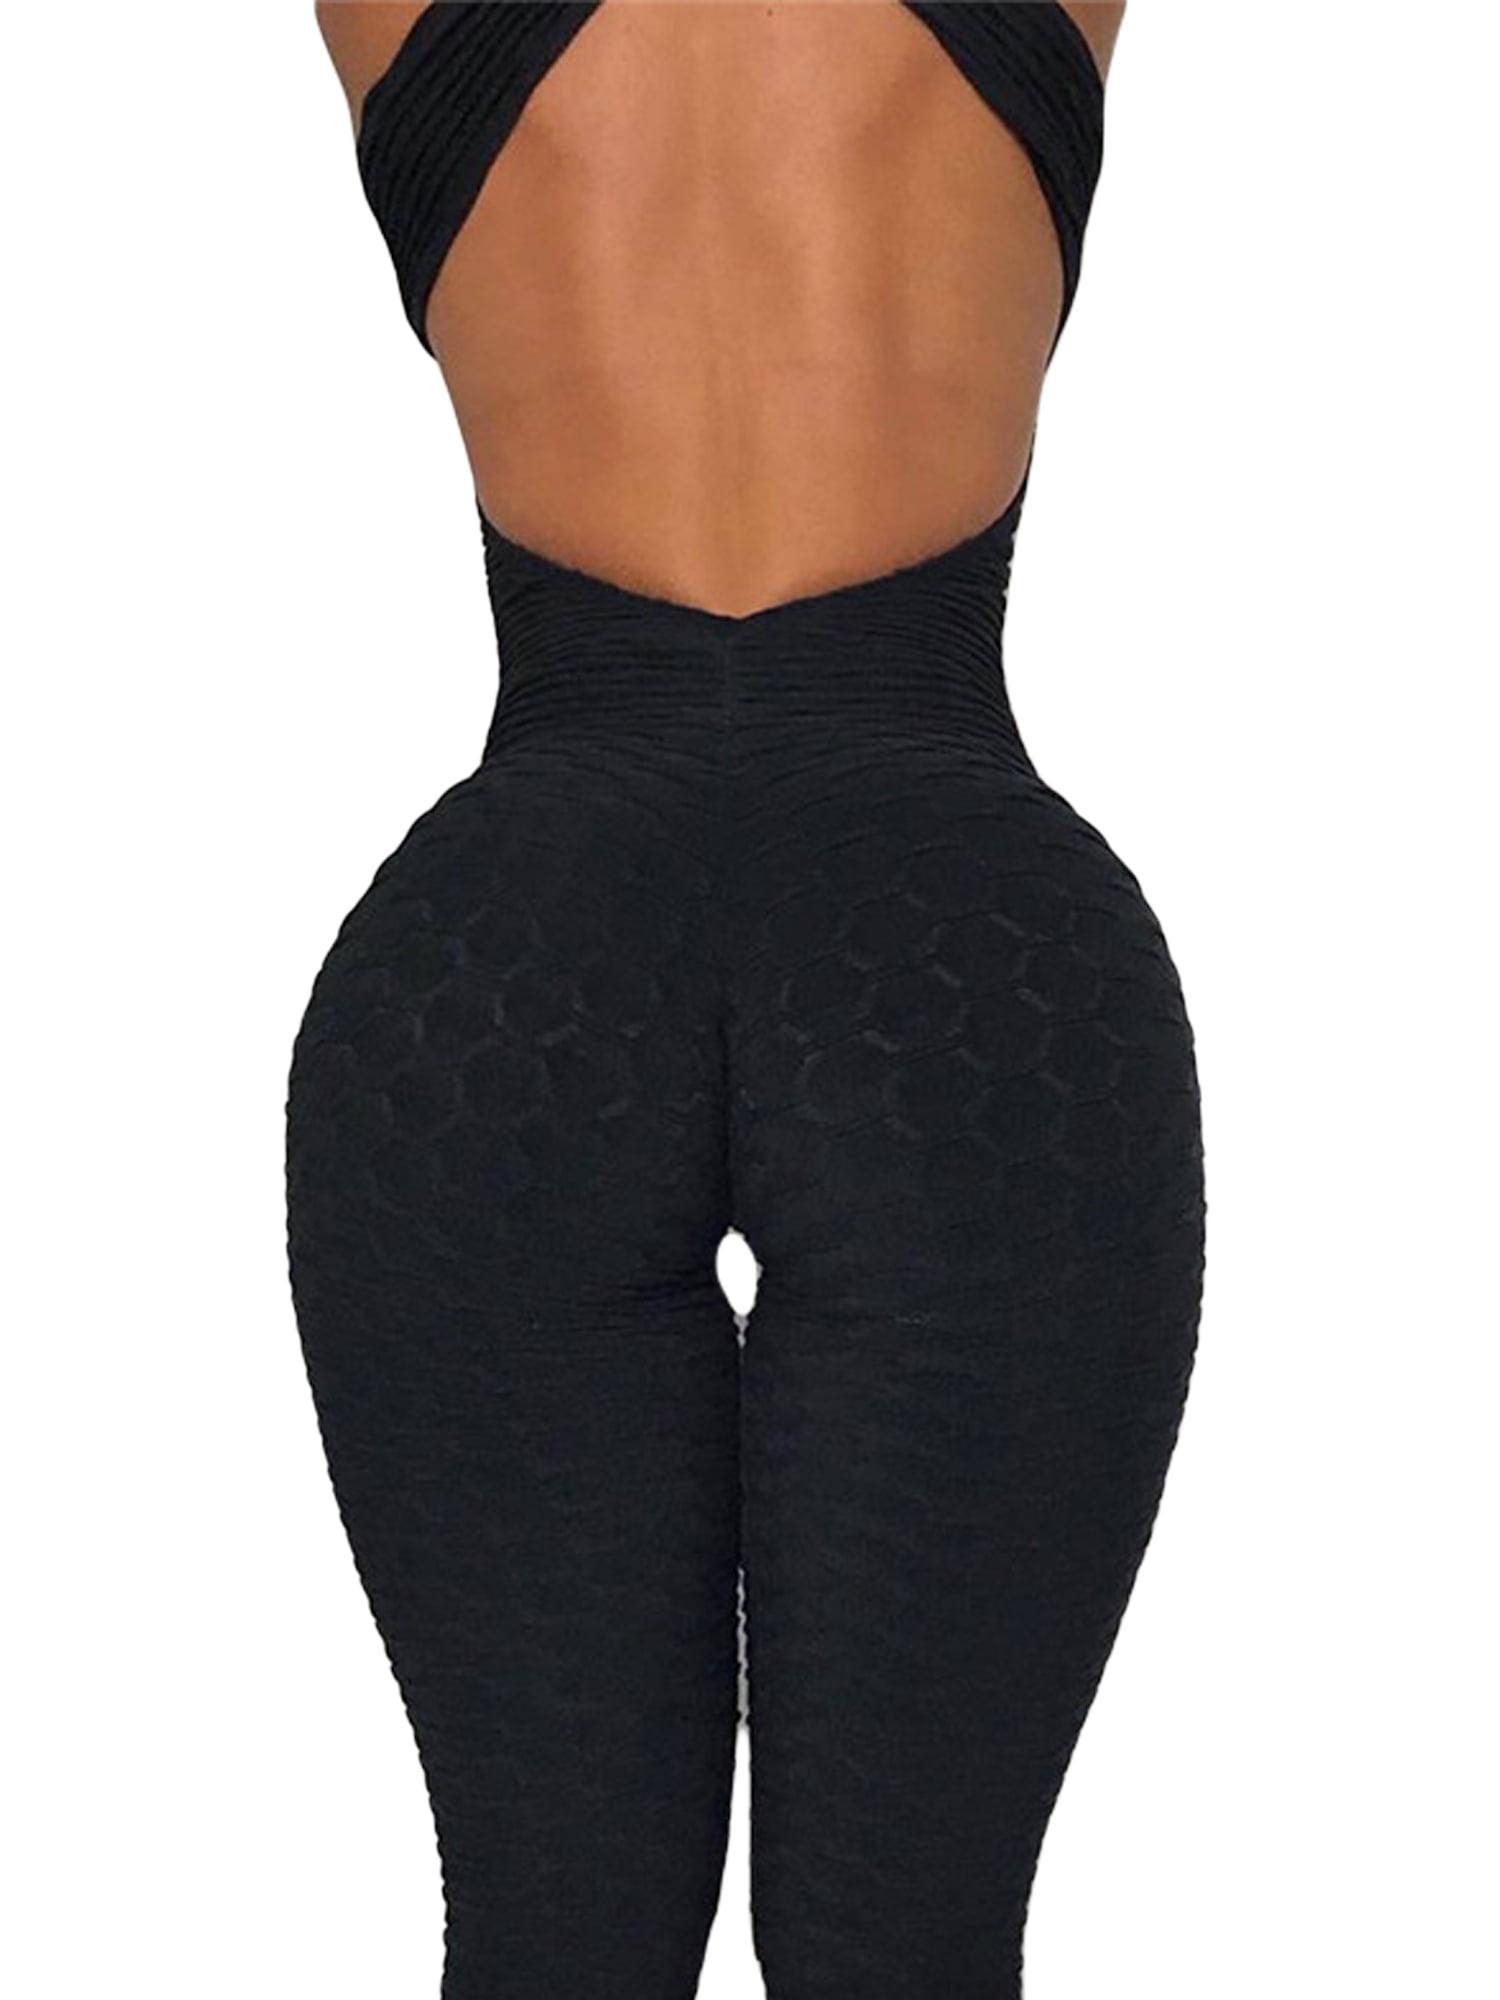 Womens Sports YOGA Pants Workout Gym Fitness Leggings Jumpsuit Athletic Clothes 